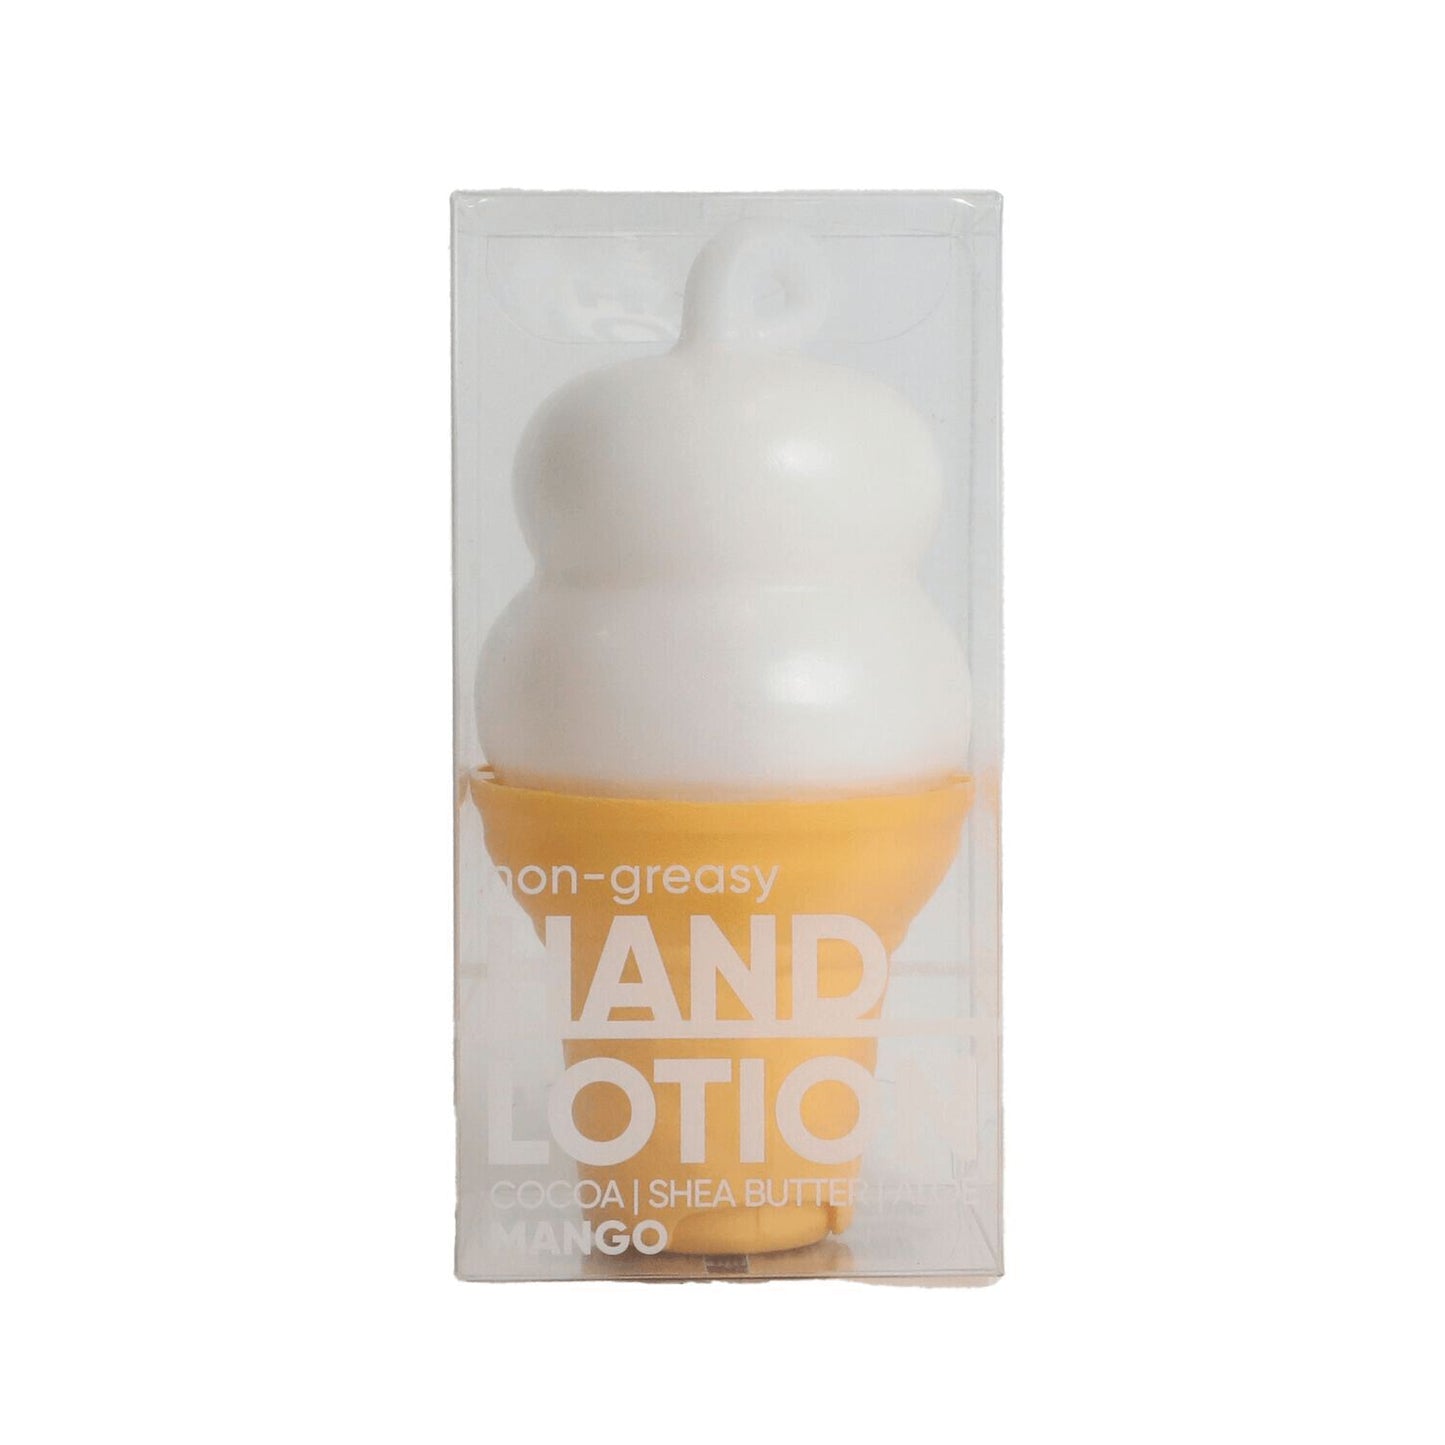 Rebels Refinery Ice Cream Hand Lotion